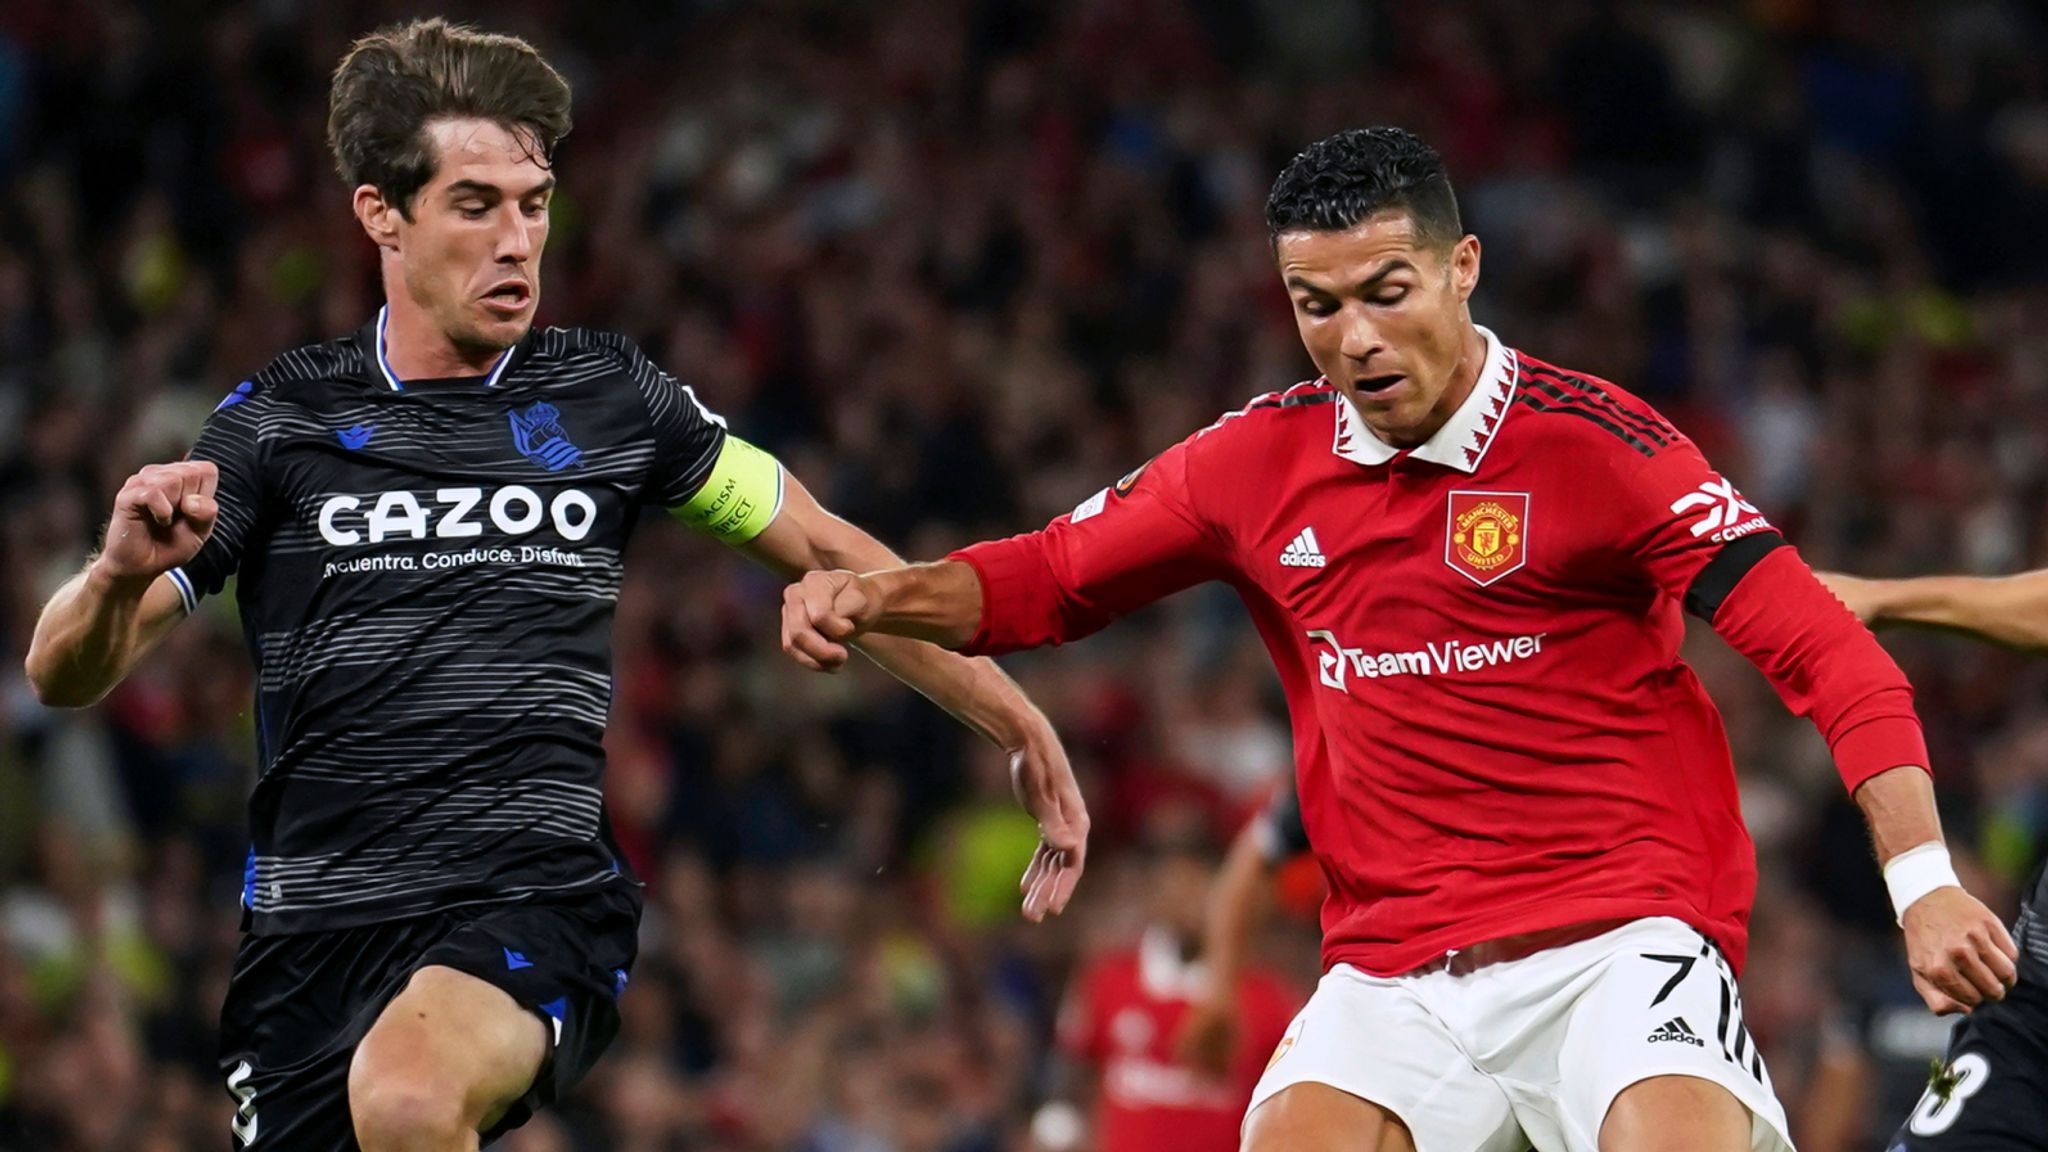 Man United gets Europa League group with Silva's Sociedad